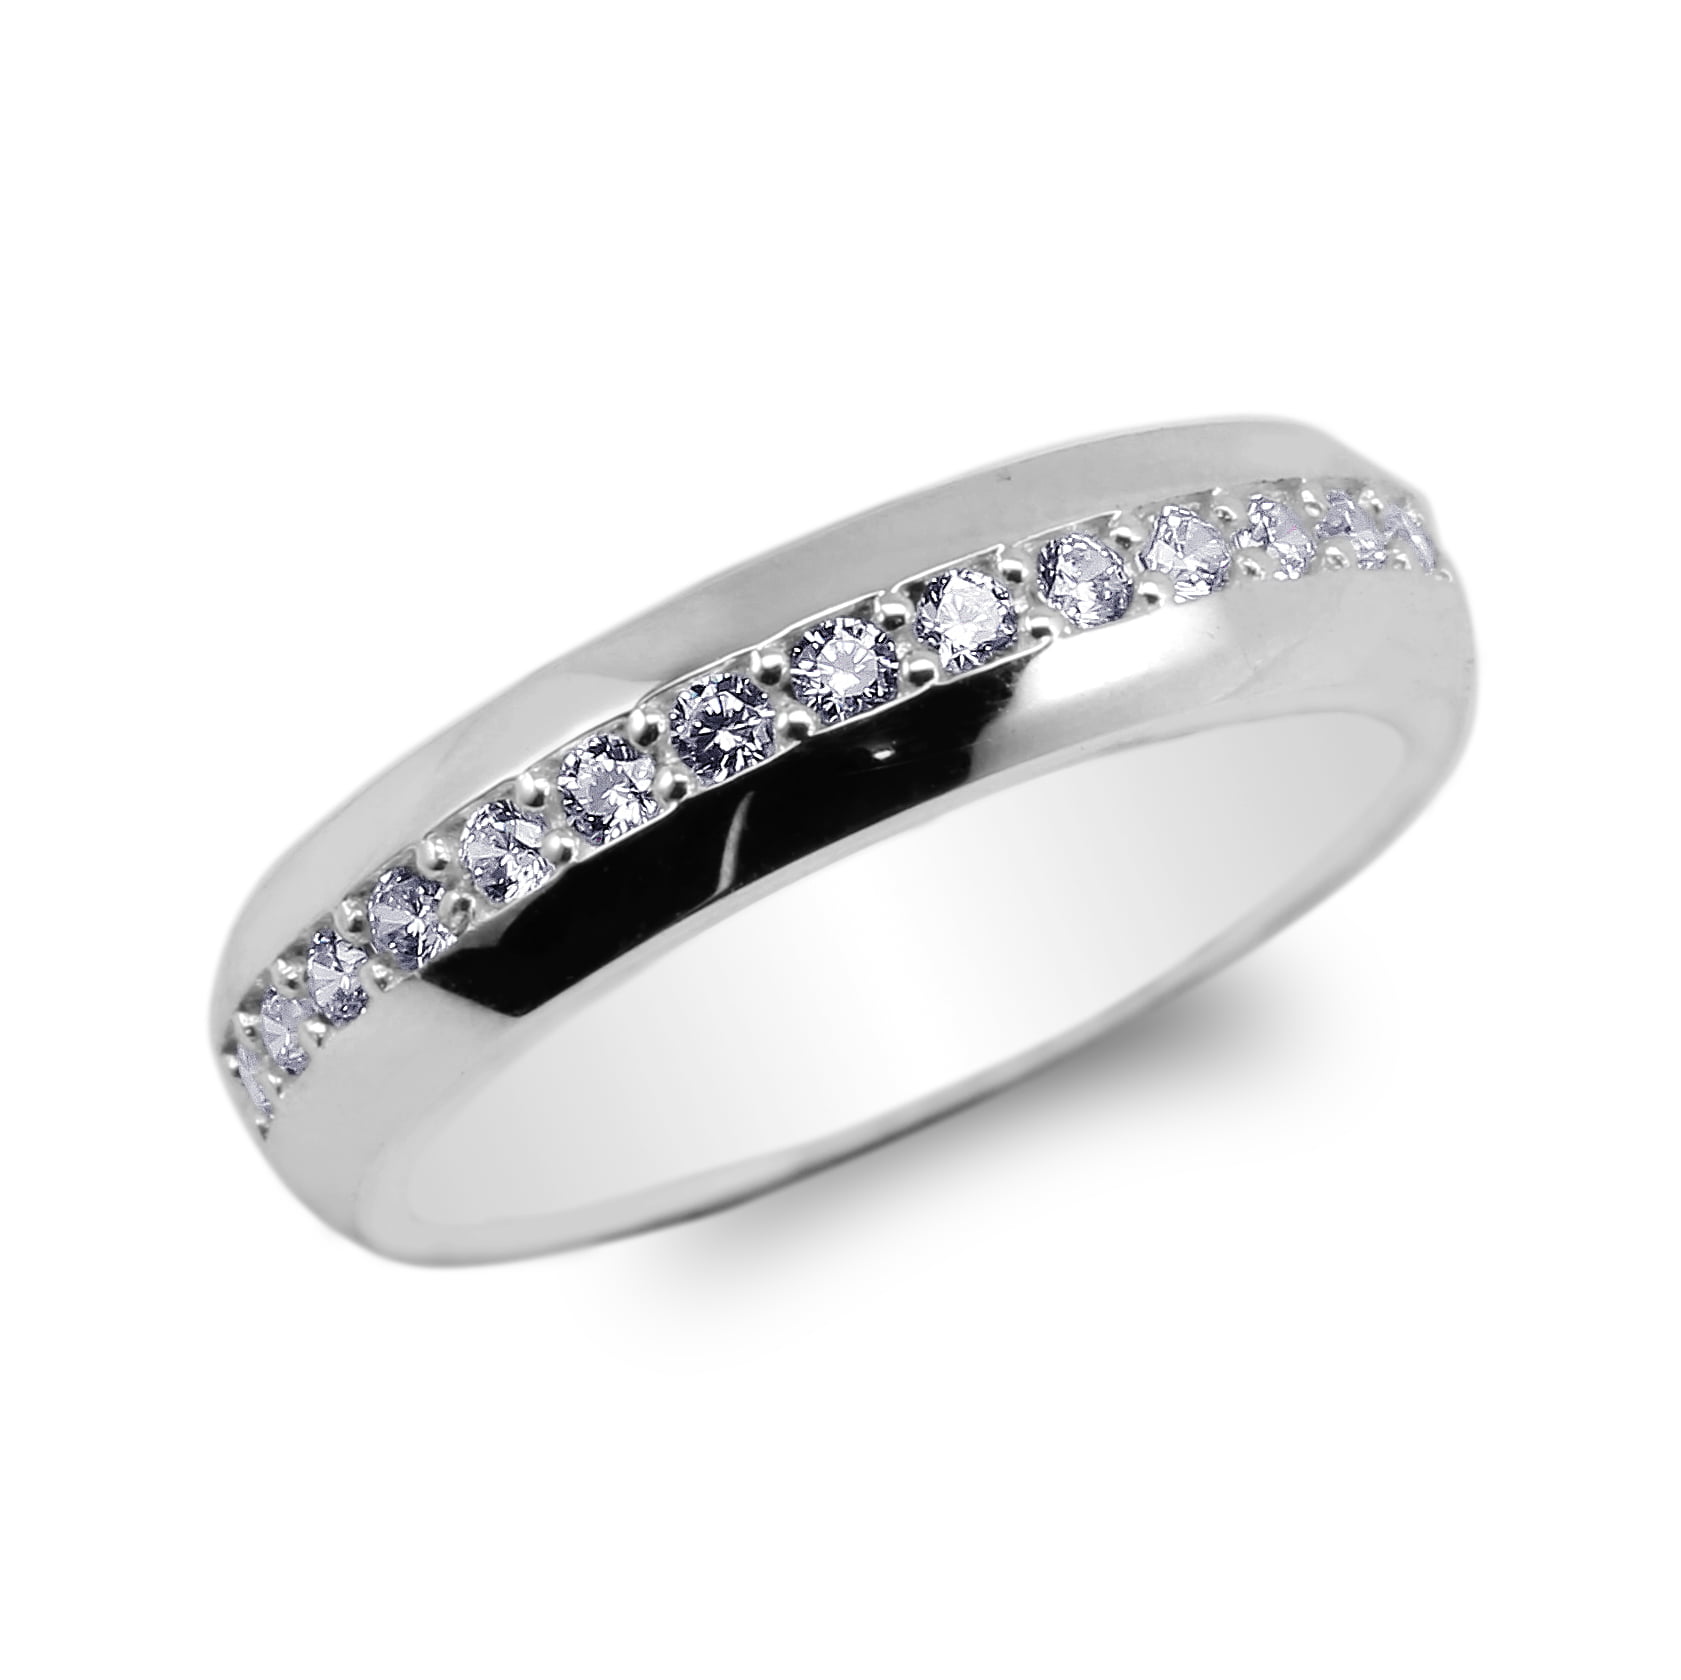 Eternity Wedding Anniversary Band .925 Sterling Silver Ring Sizes 5-10 